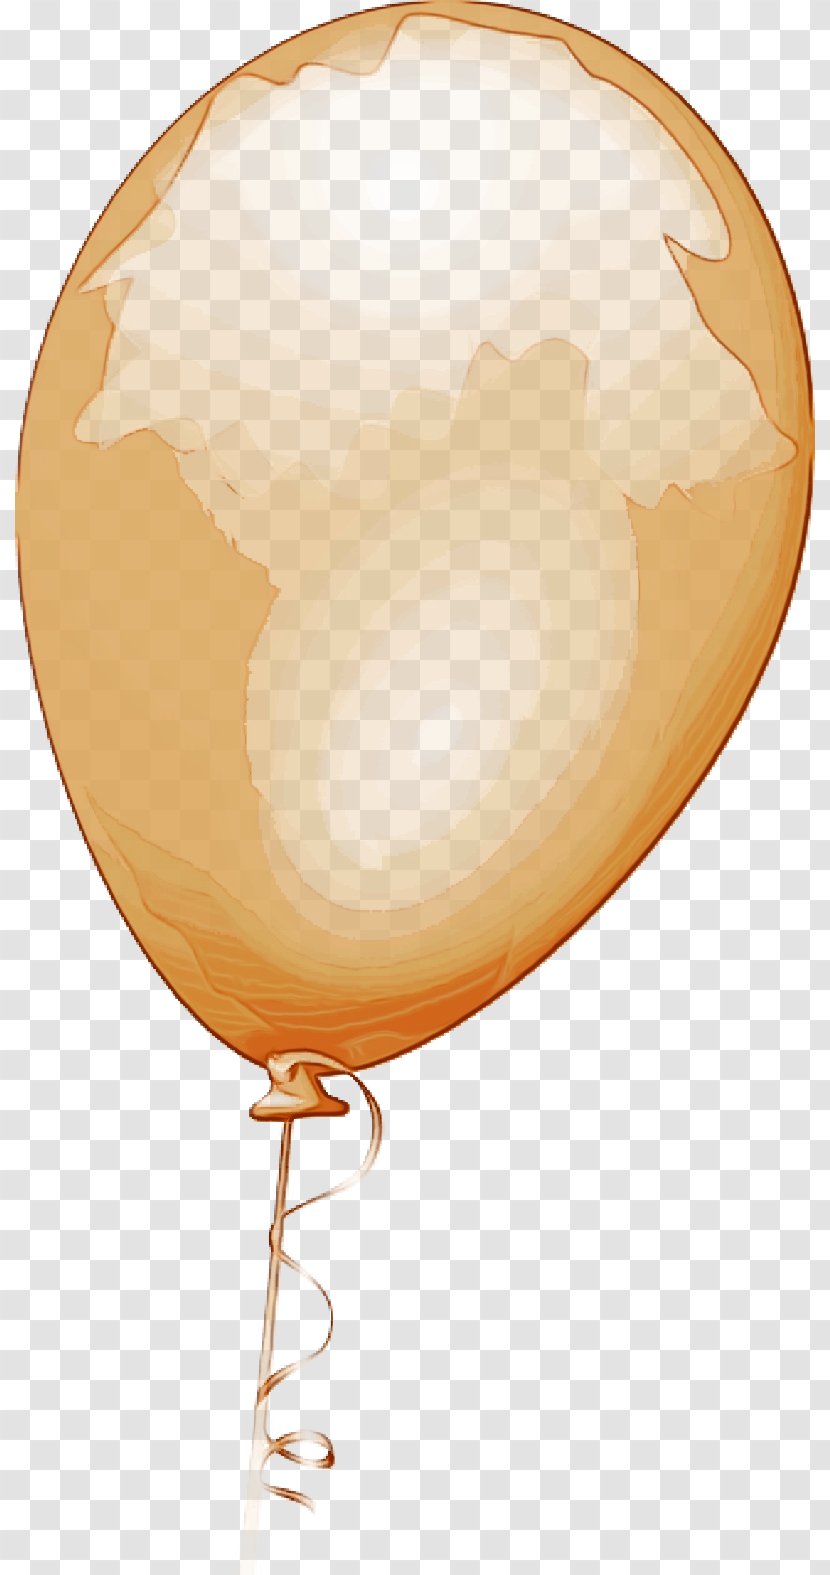 Balloon Background - Peach - Sphere Transparent PNG